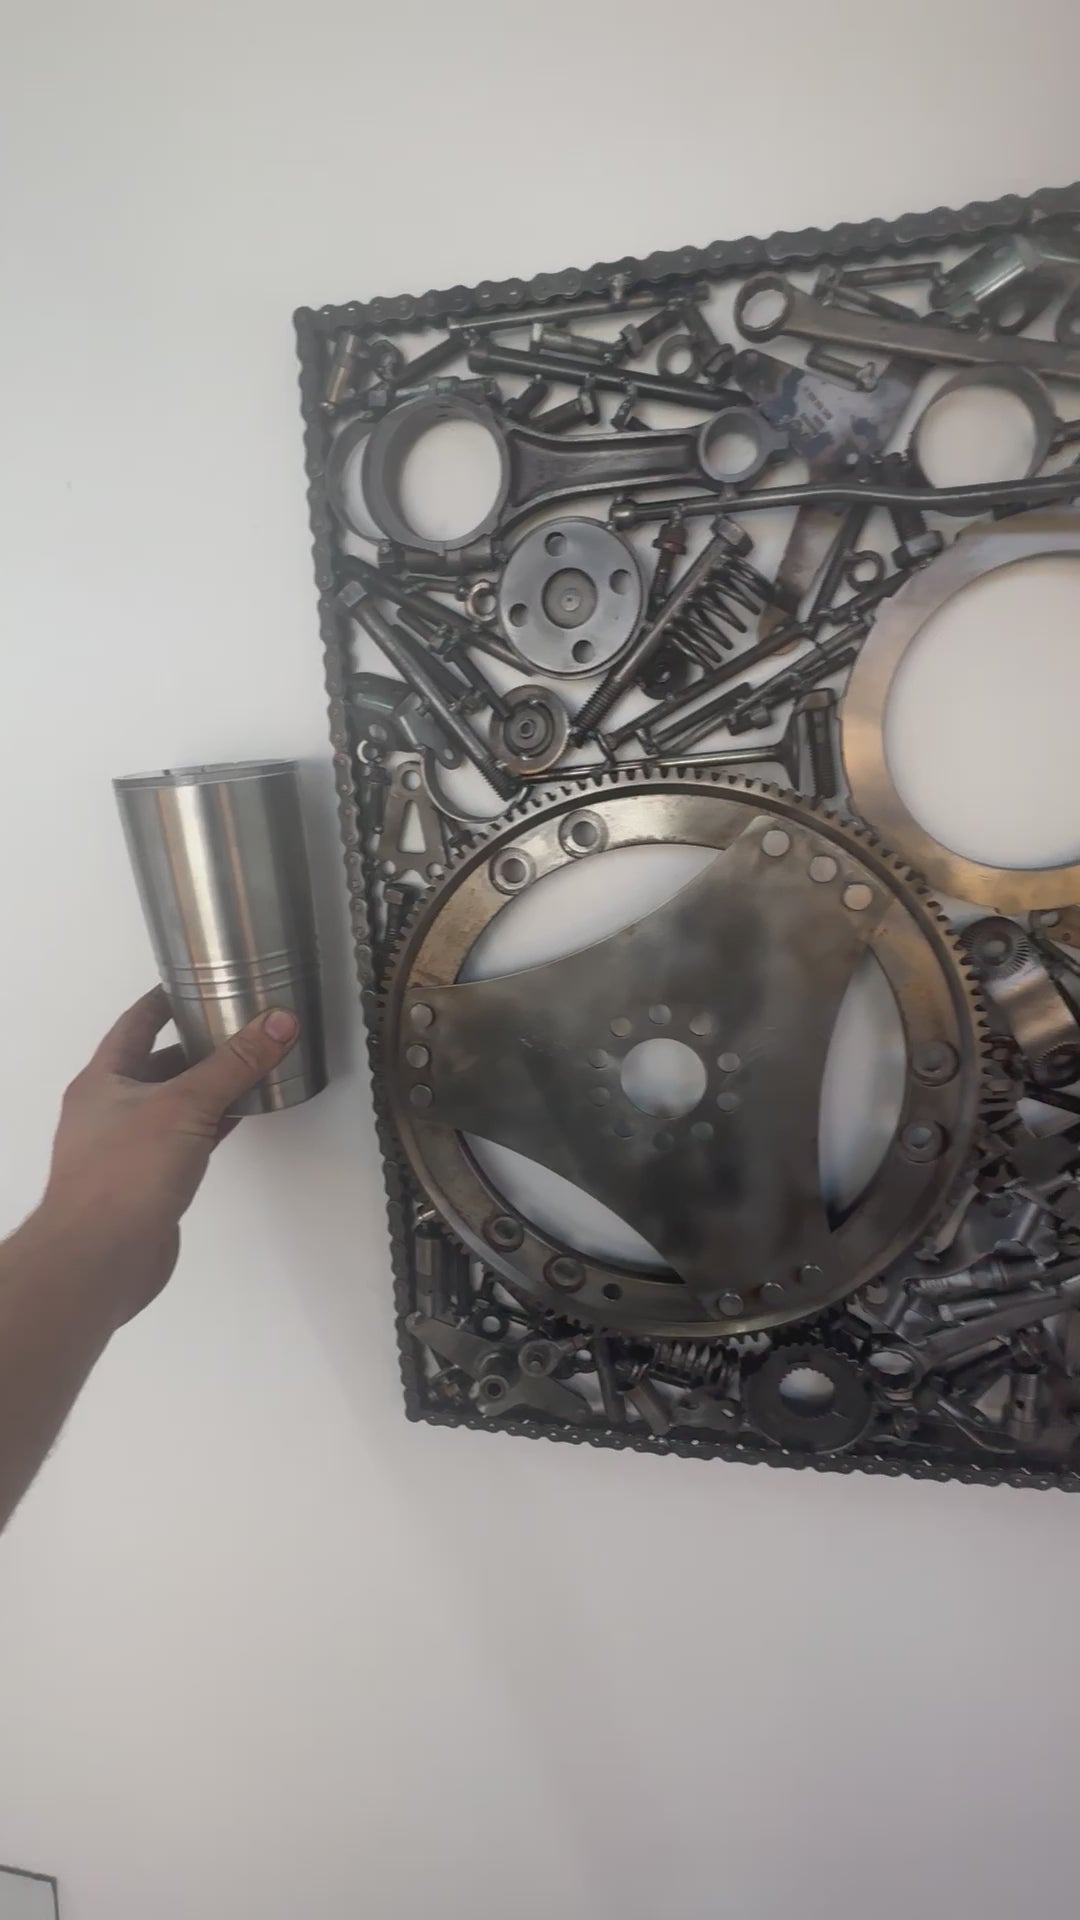 Video of a 24 by 24 inch wall hanging automotive wall art piece, made out of real car parts